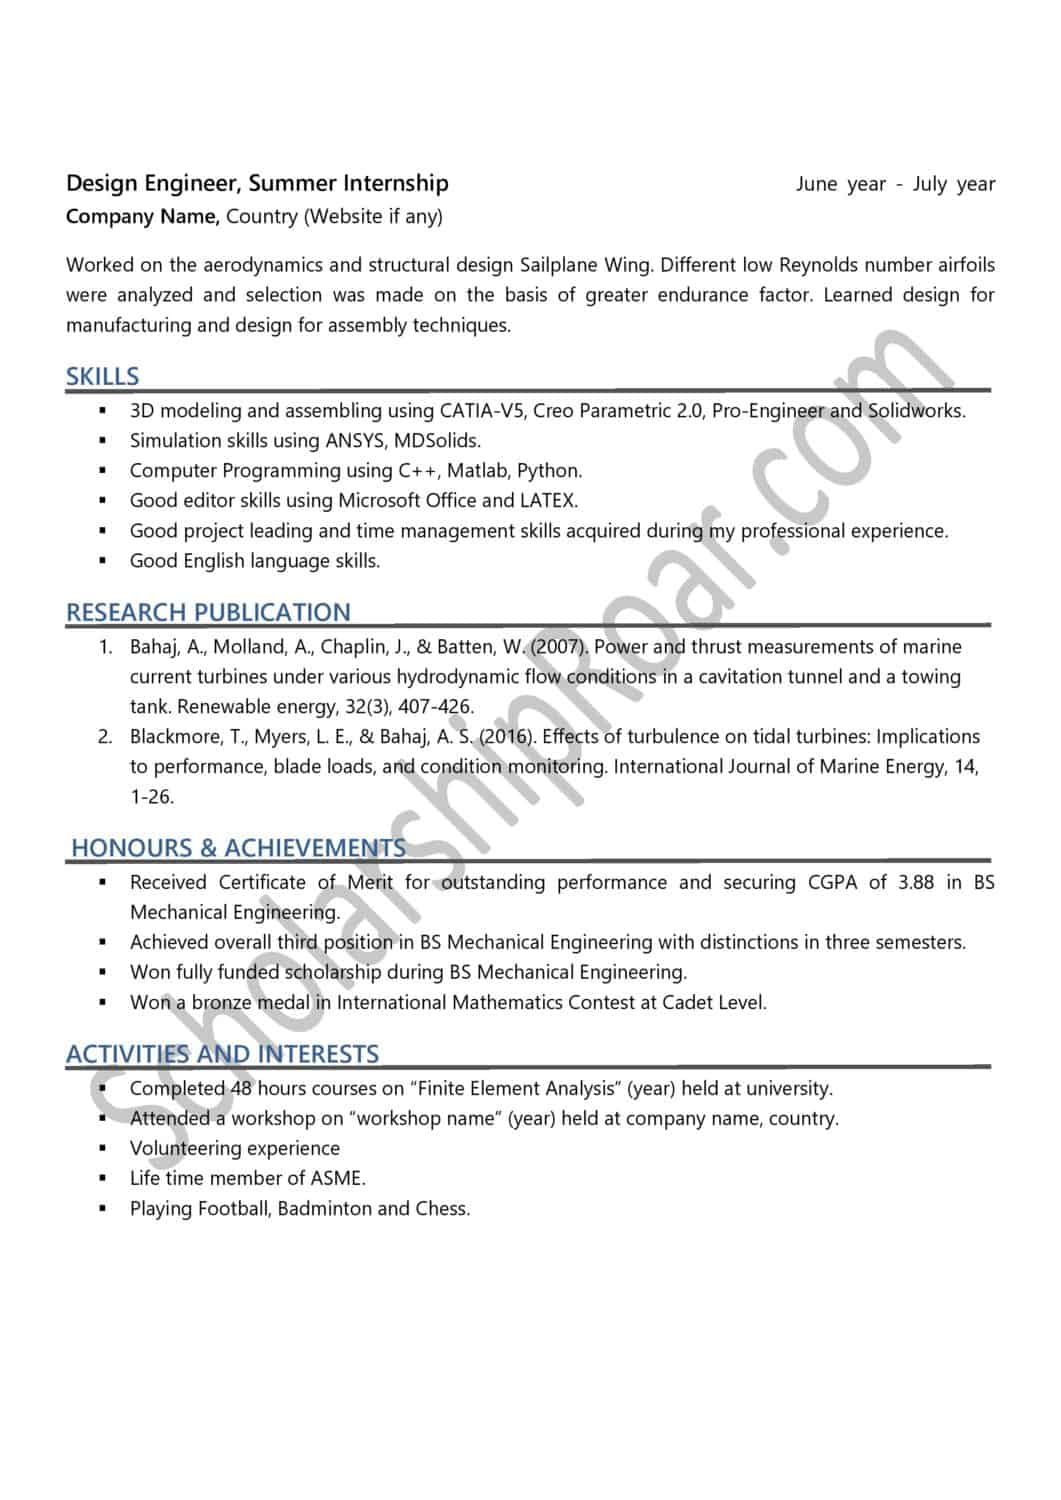 How to Write Academic CV for Scholarship (25 Examples